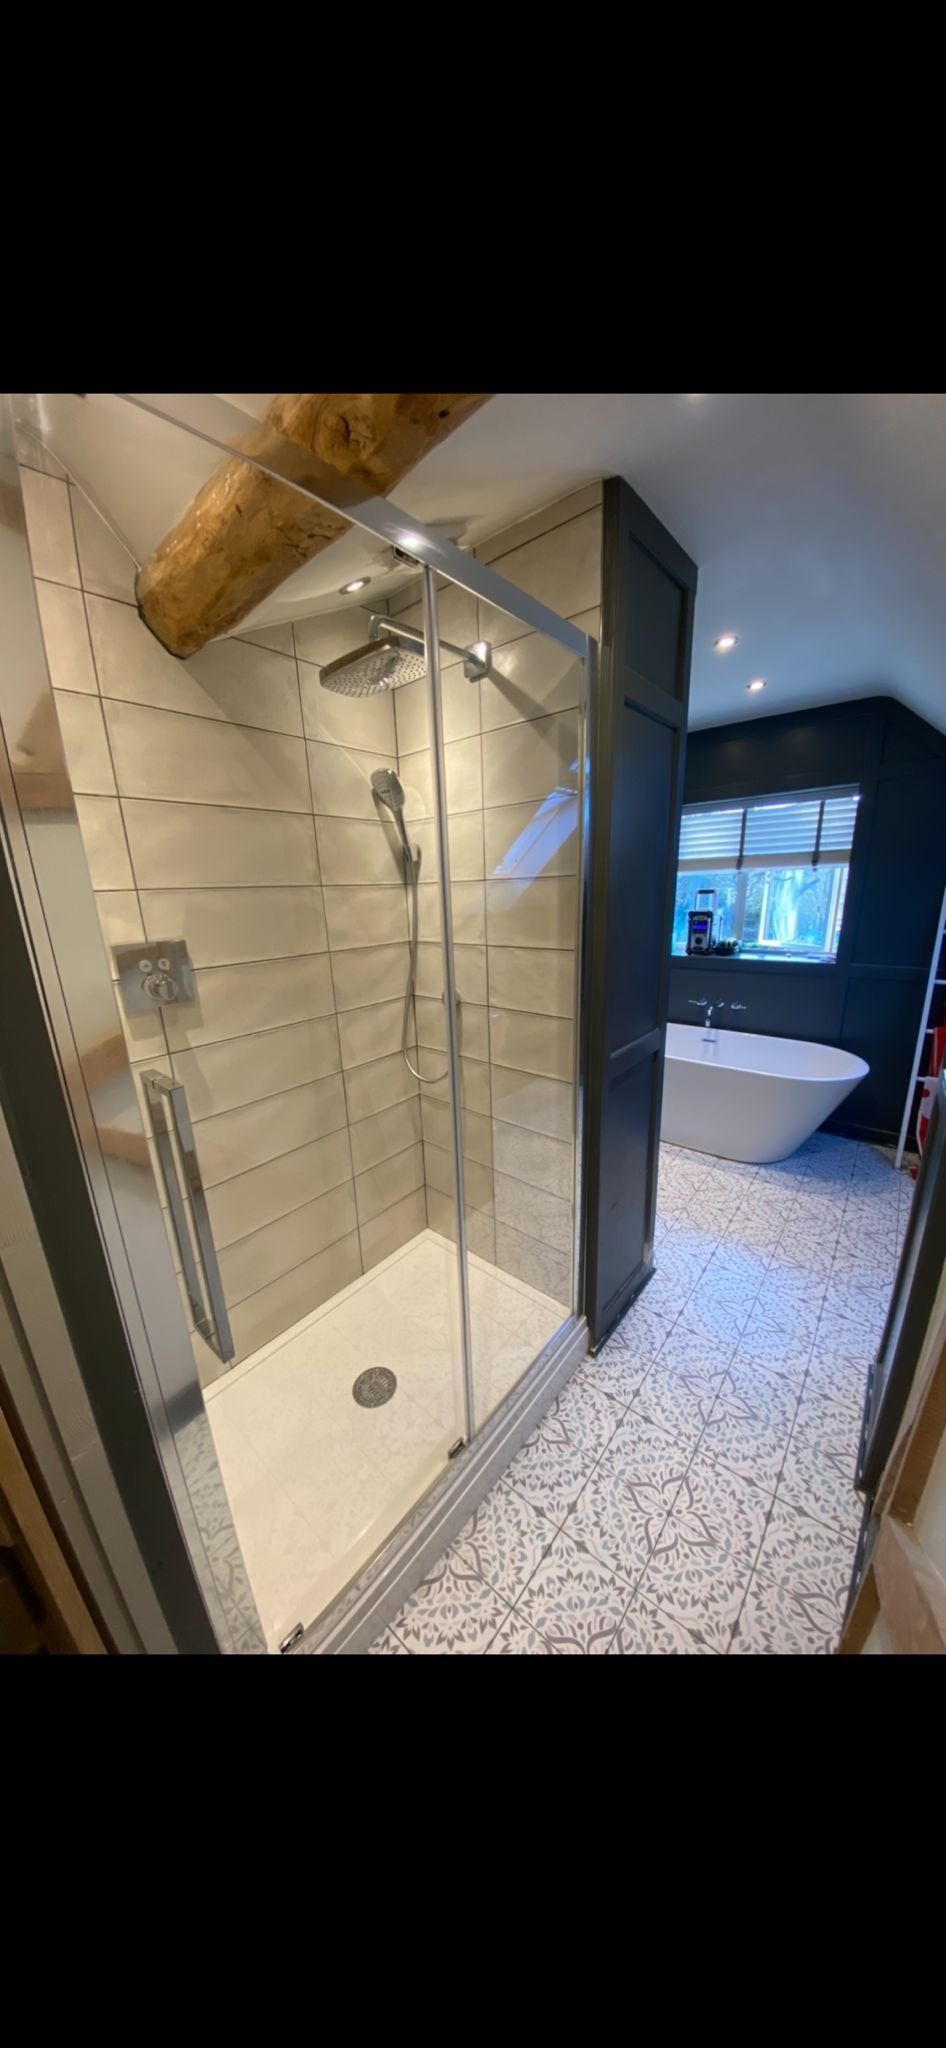 Impressive and spacious bathroom installed by Cotswold Vale showing shower cubicle and free standing bath